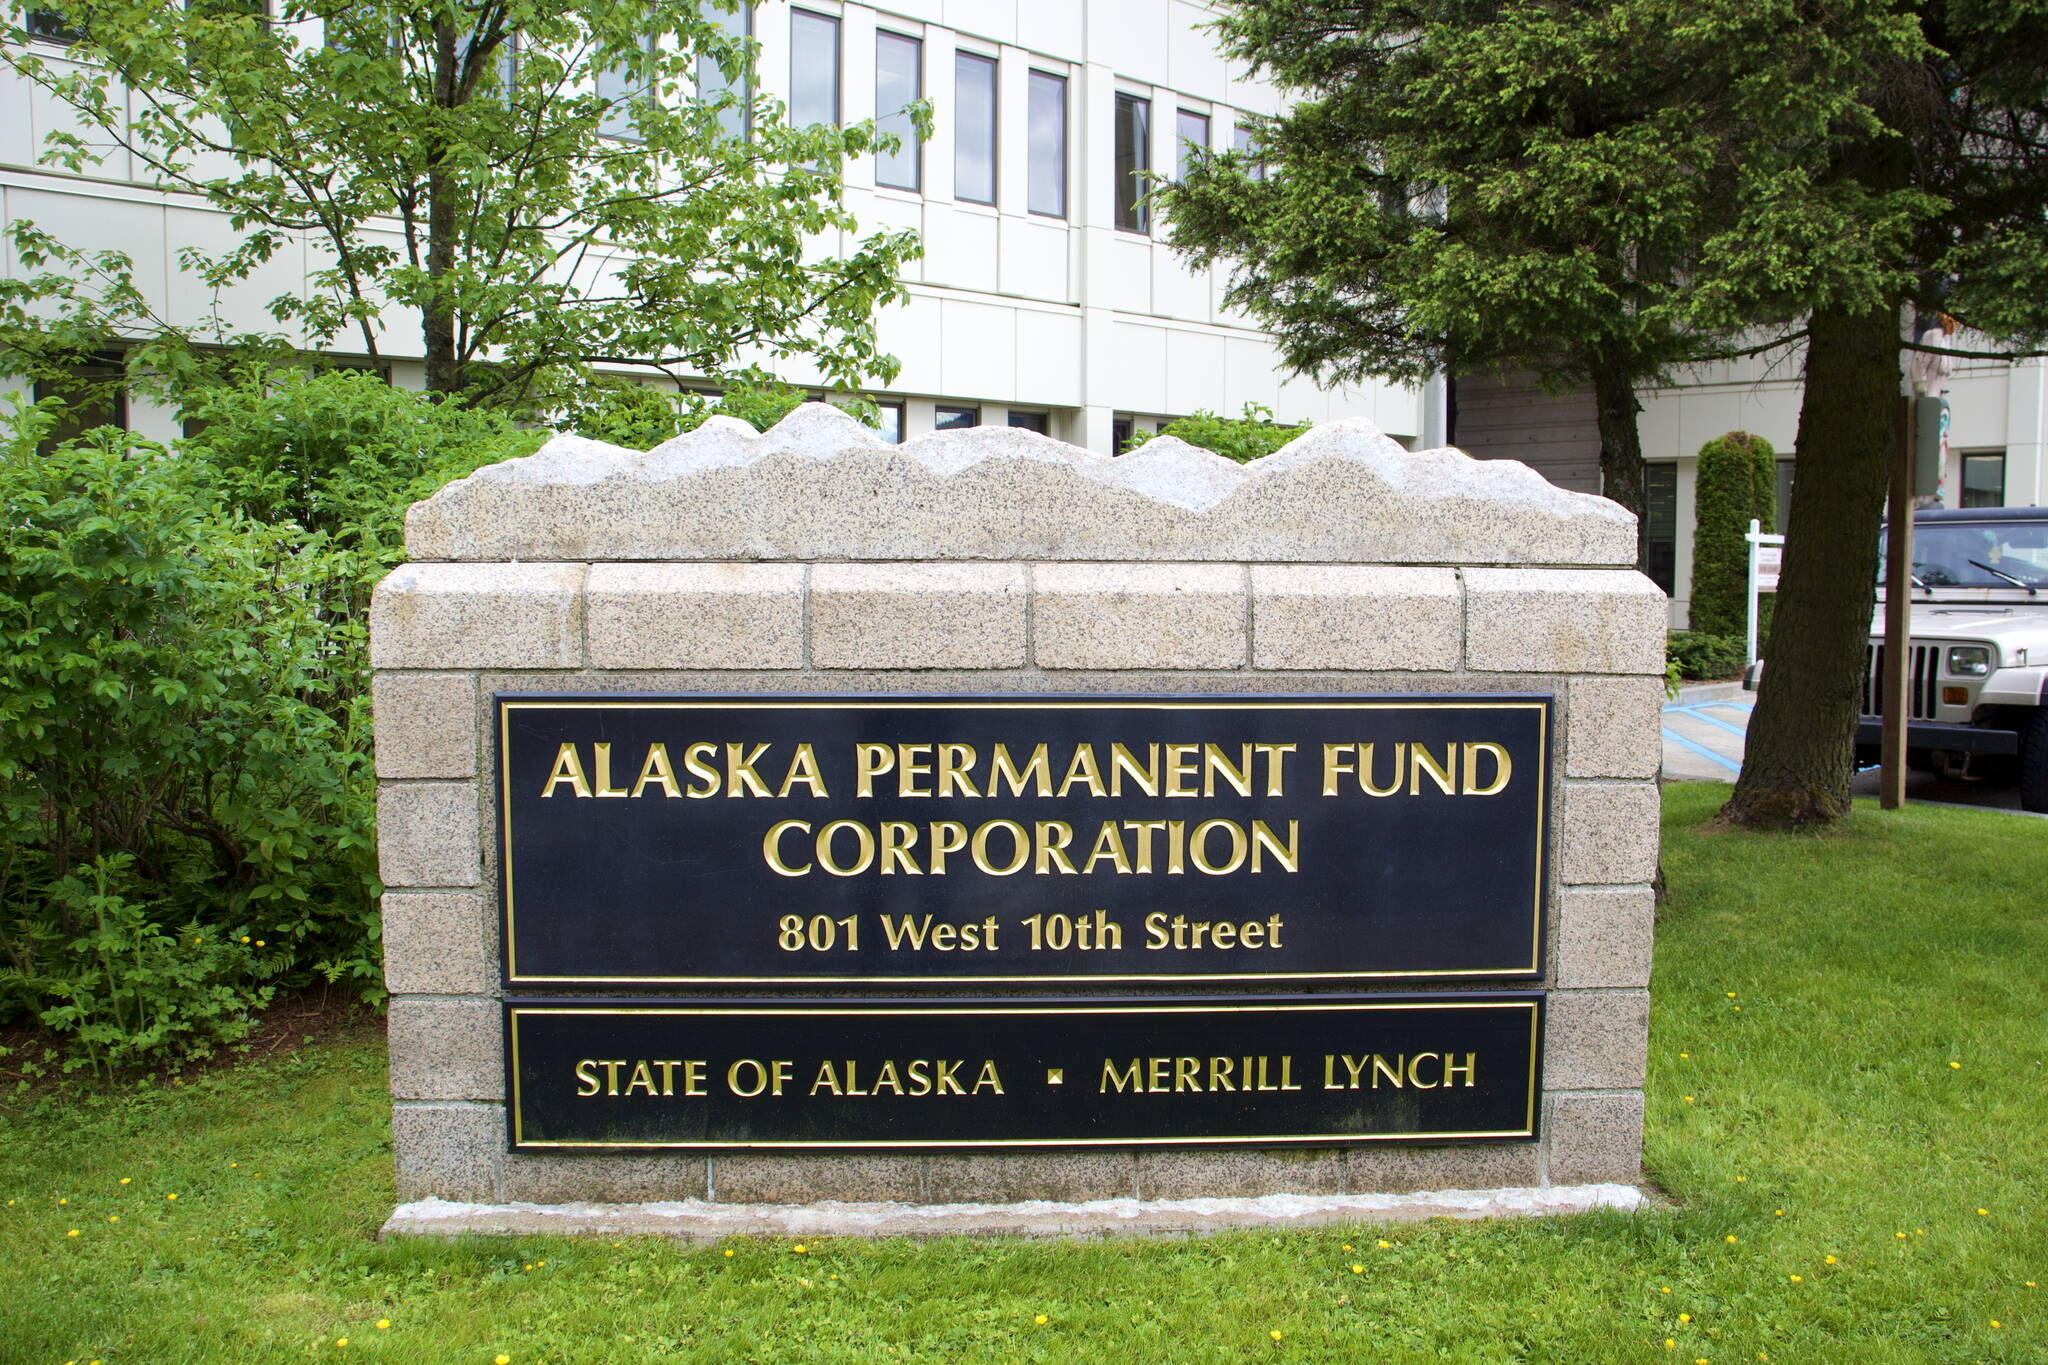 The Alaska Permanent Fund Corp. headquarters in Juneau is where most of the estimated 70 employees manage the state’s primary savings account. The corporation’s board of trustees has directed staff to evaluate options for moving some operations to Anchorage. (Mark Sabbatini / Juneau Empire)